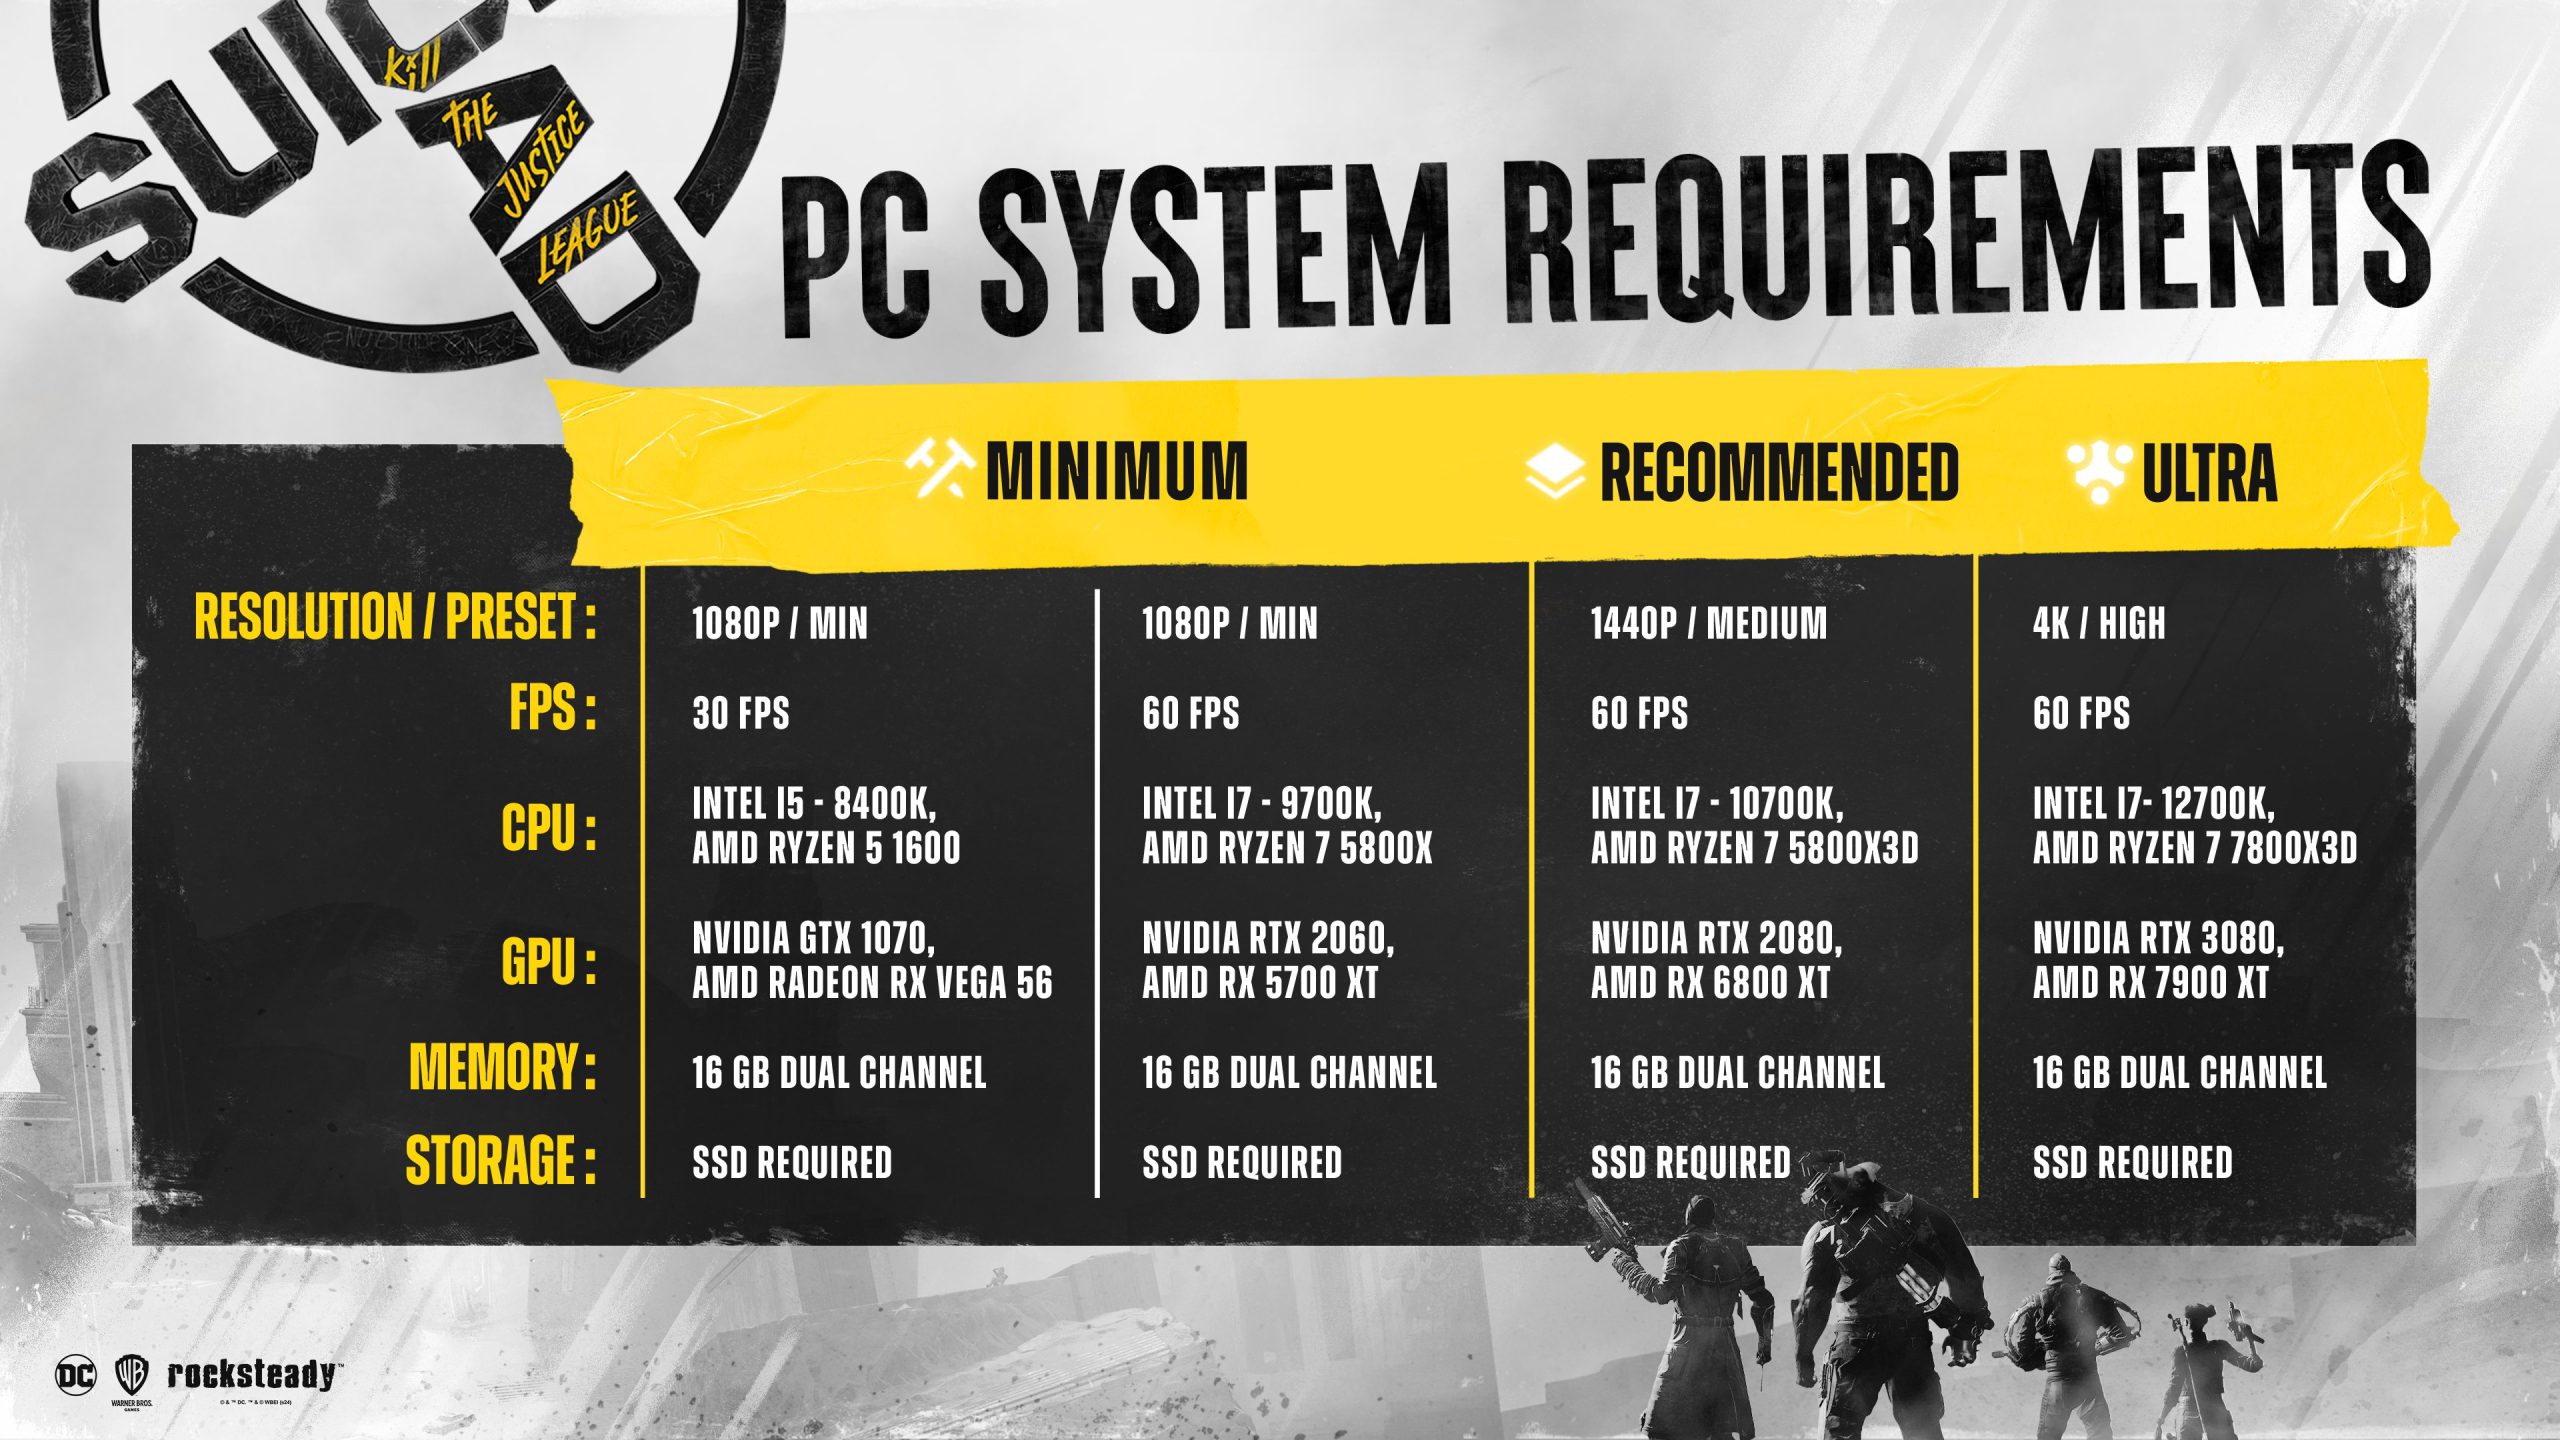 Suicide Squad: Kill The Justice League PC system specs shared by Rocksteady Studios.